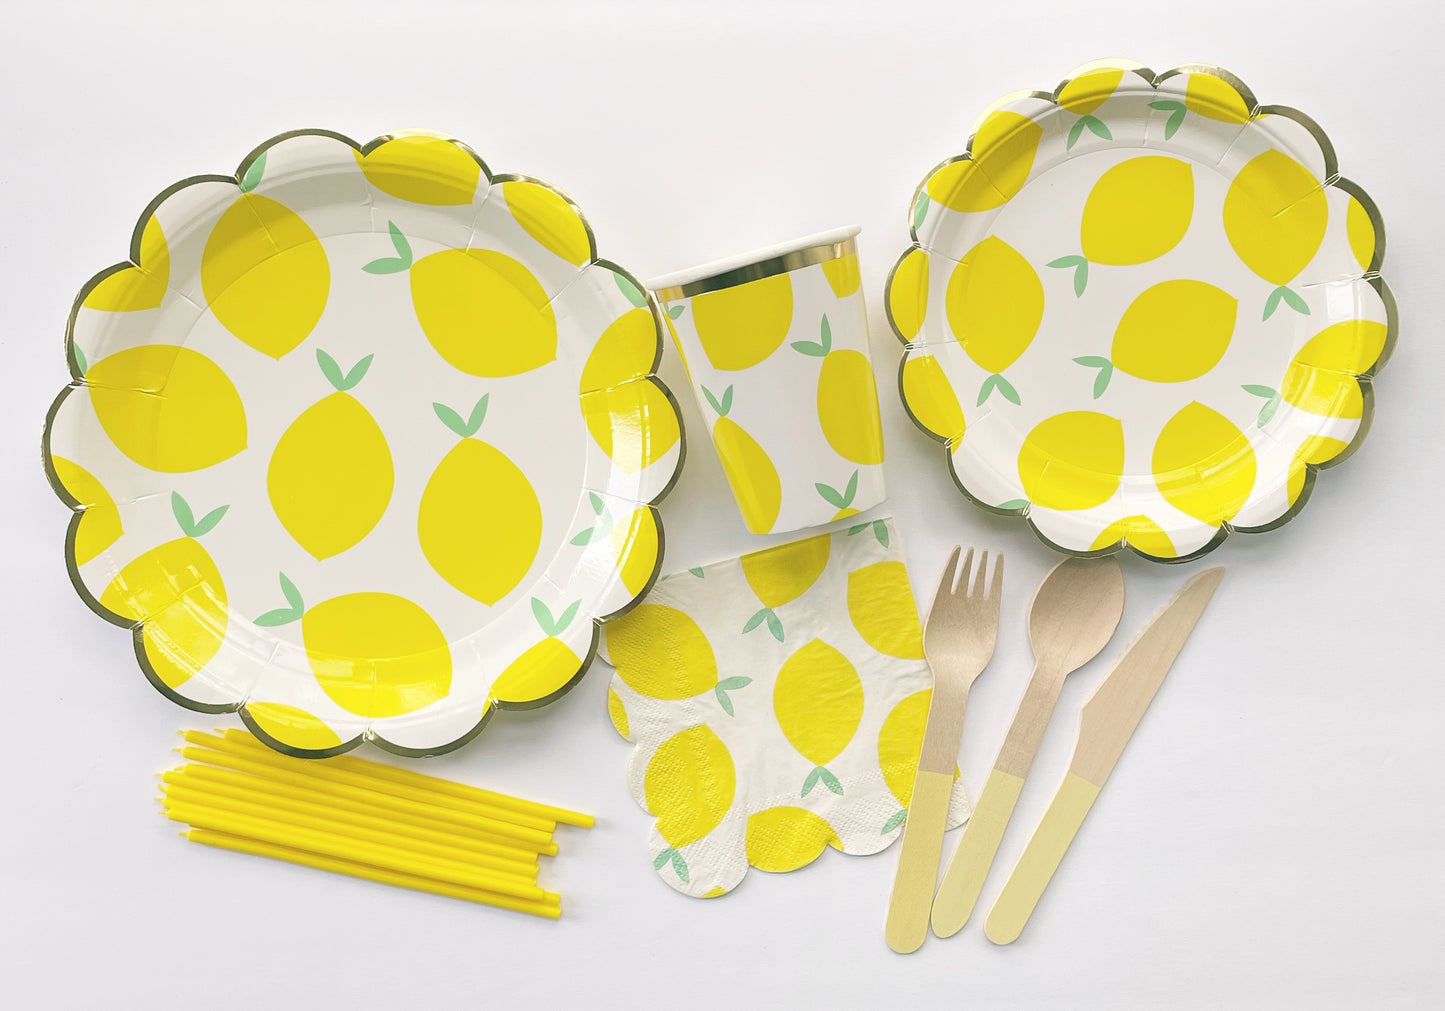 The complete Lemon Party Kit including large paper party plates, small paper party plates, paper cups, paper napkins, yellow dipped wooden utensils and tall yellow birthday candles. The lemon pattern includes yellow, green and white colours. The party plates have gold scalloped edges.